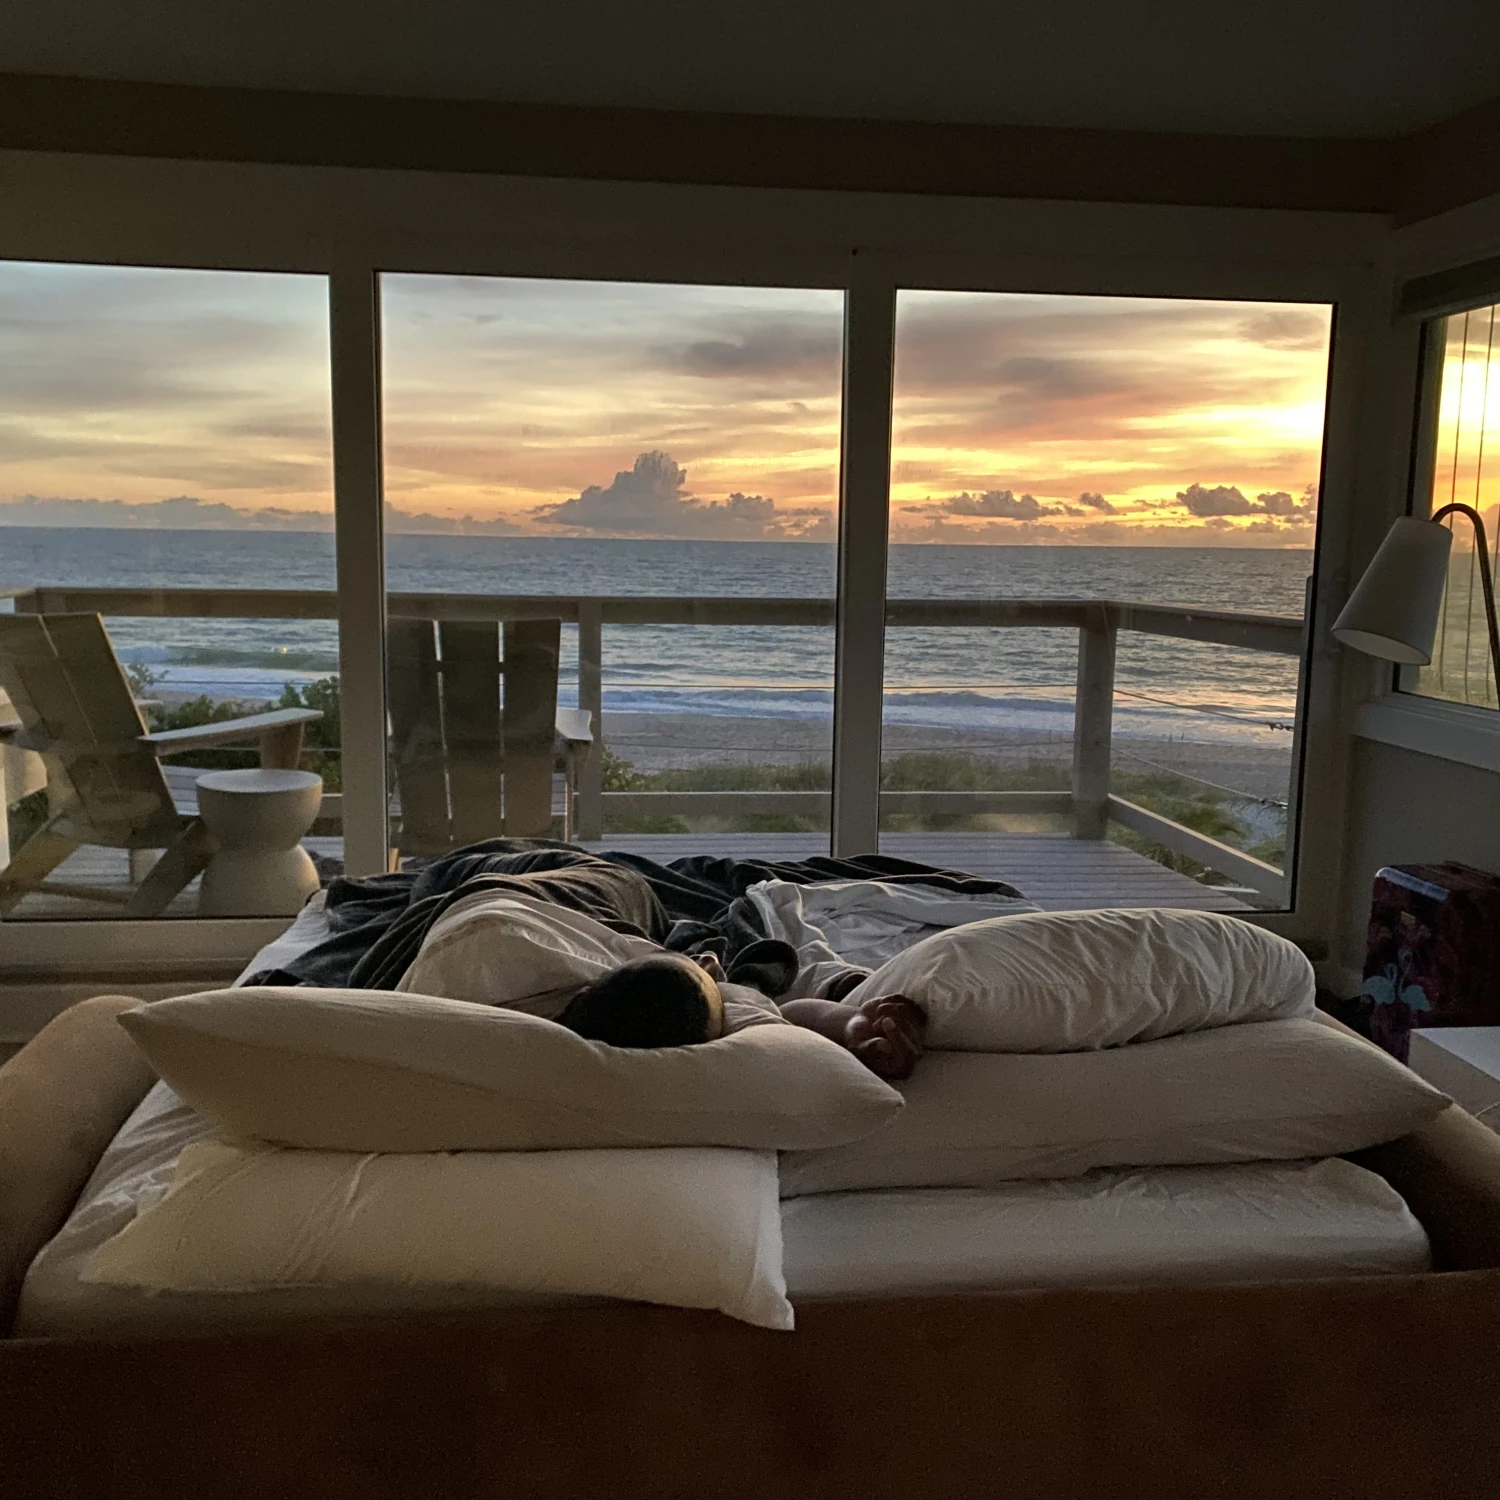 View of a beautiful hotel room beside the sea